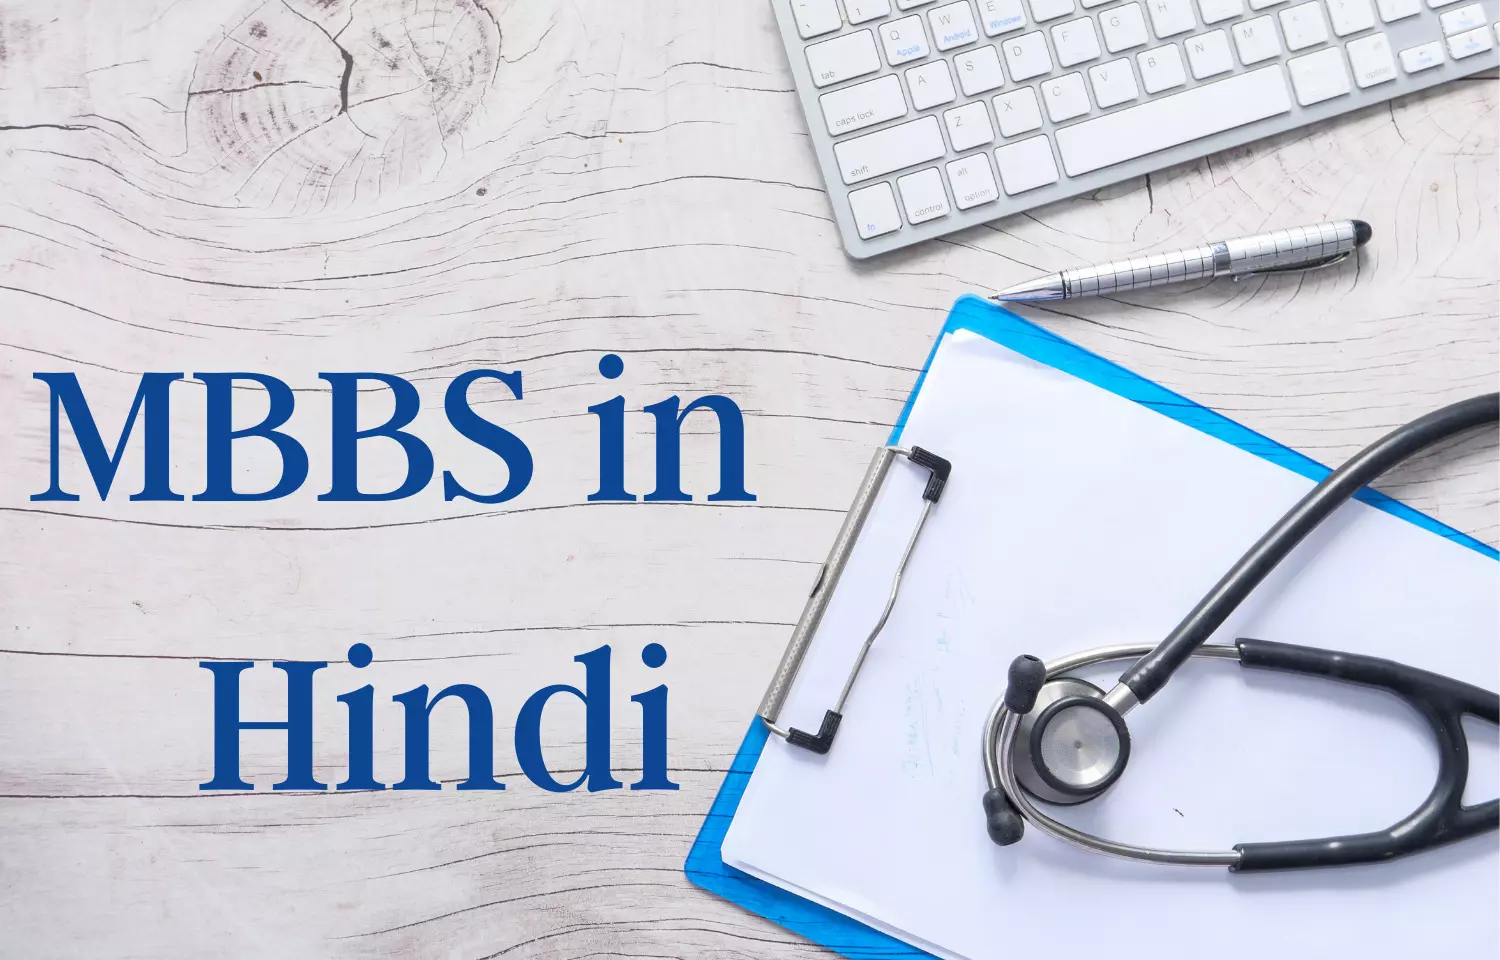 Gandhi Medical College to offer MBBS in Hindi from Next Academic Session